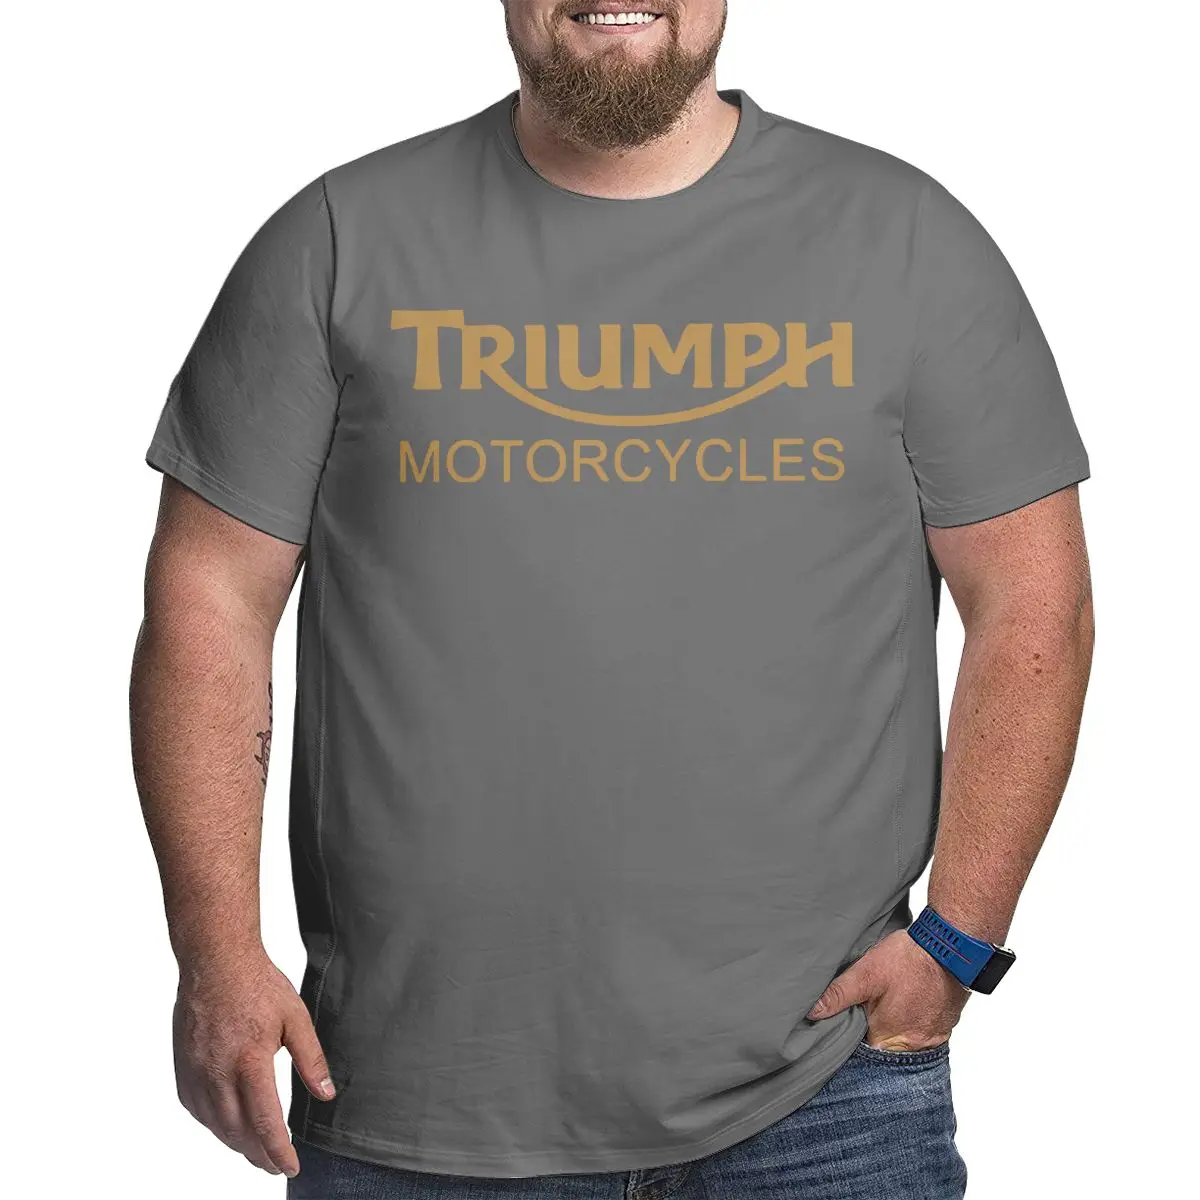 

2021 Classic Triumph Motorcycle Logo Brand CottonT Shirts for Men Clothing Workout Tops Oversized T-shirt Plus Size